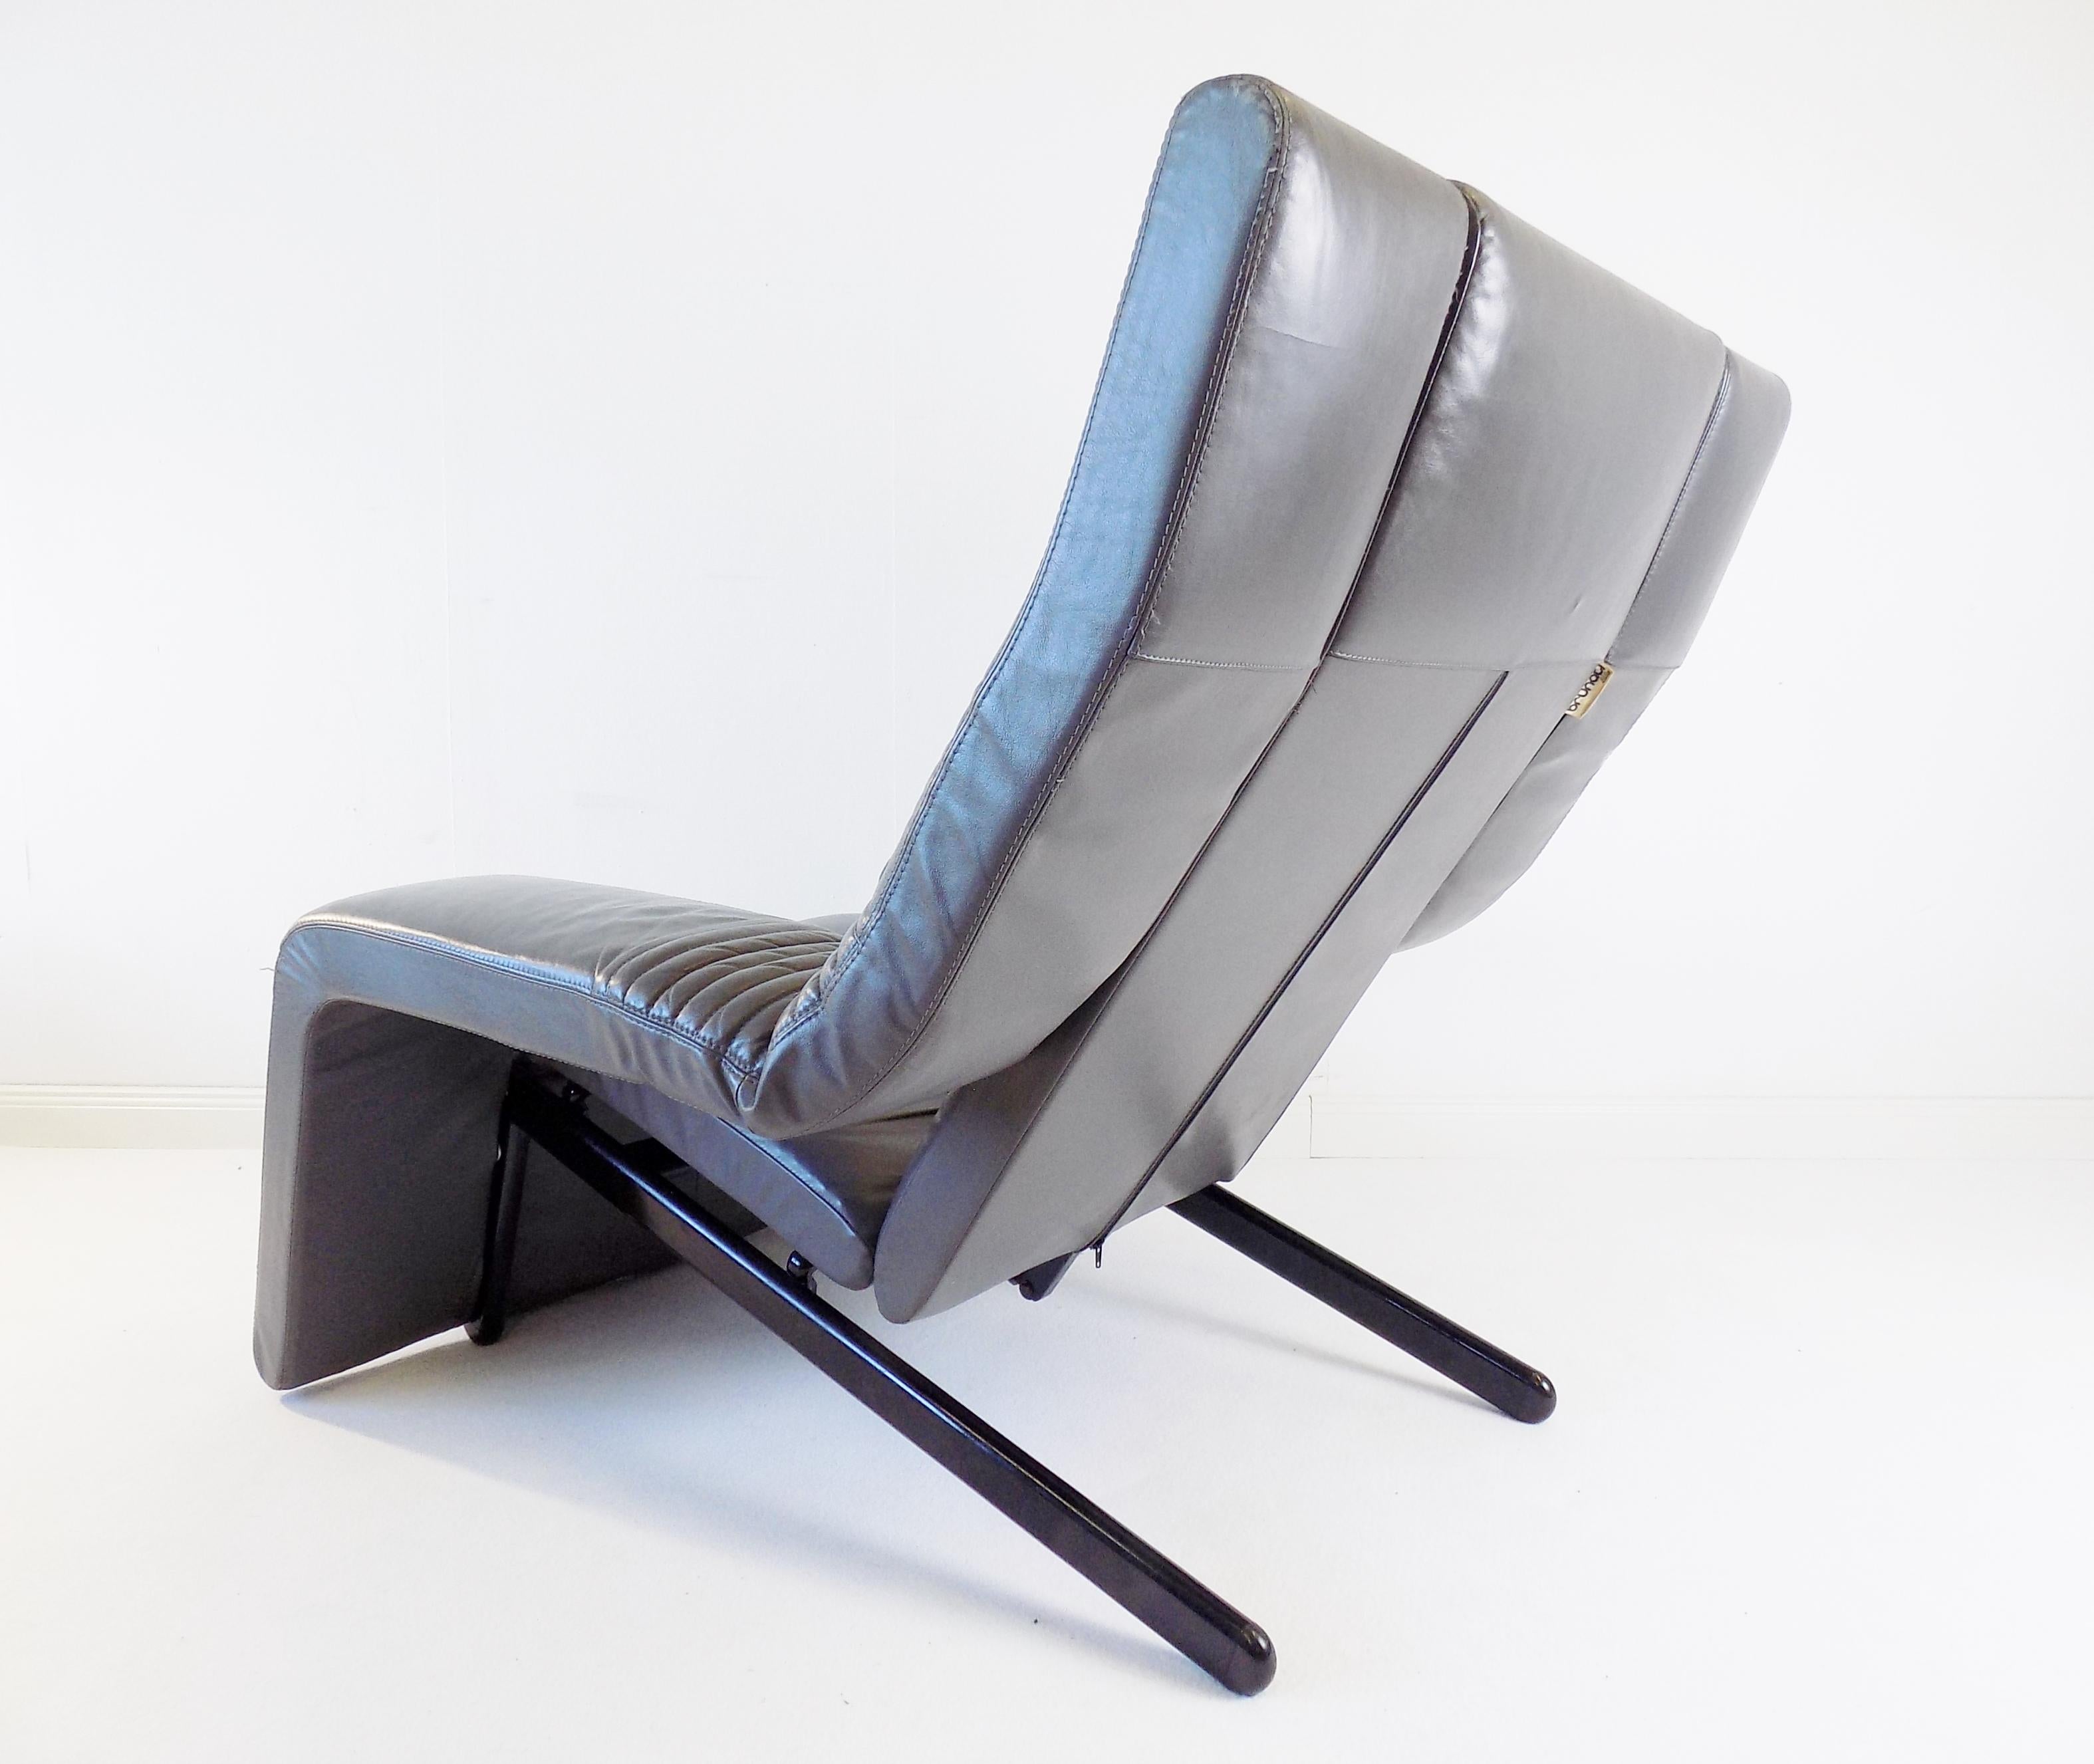 Brunati Kilkis Grey Leather Lounge Chair By Ammanati & Vitelli, Italy, 1980 In Good Condition For Sale In Ludwigslust, DE